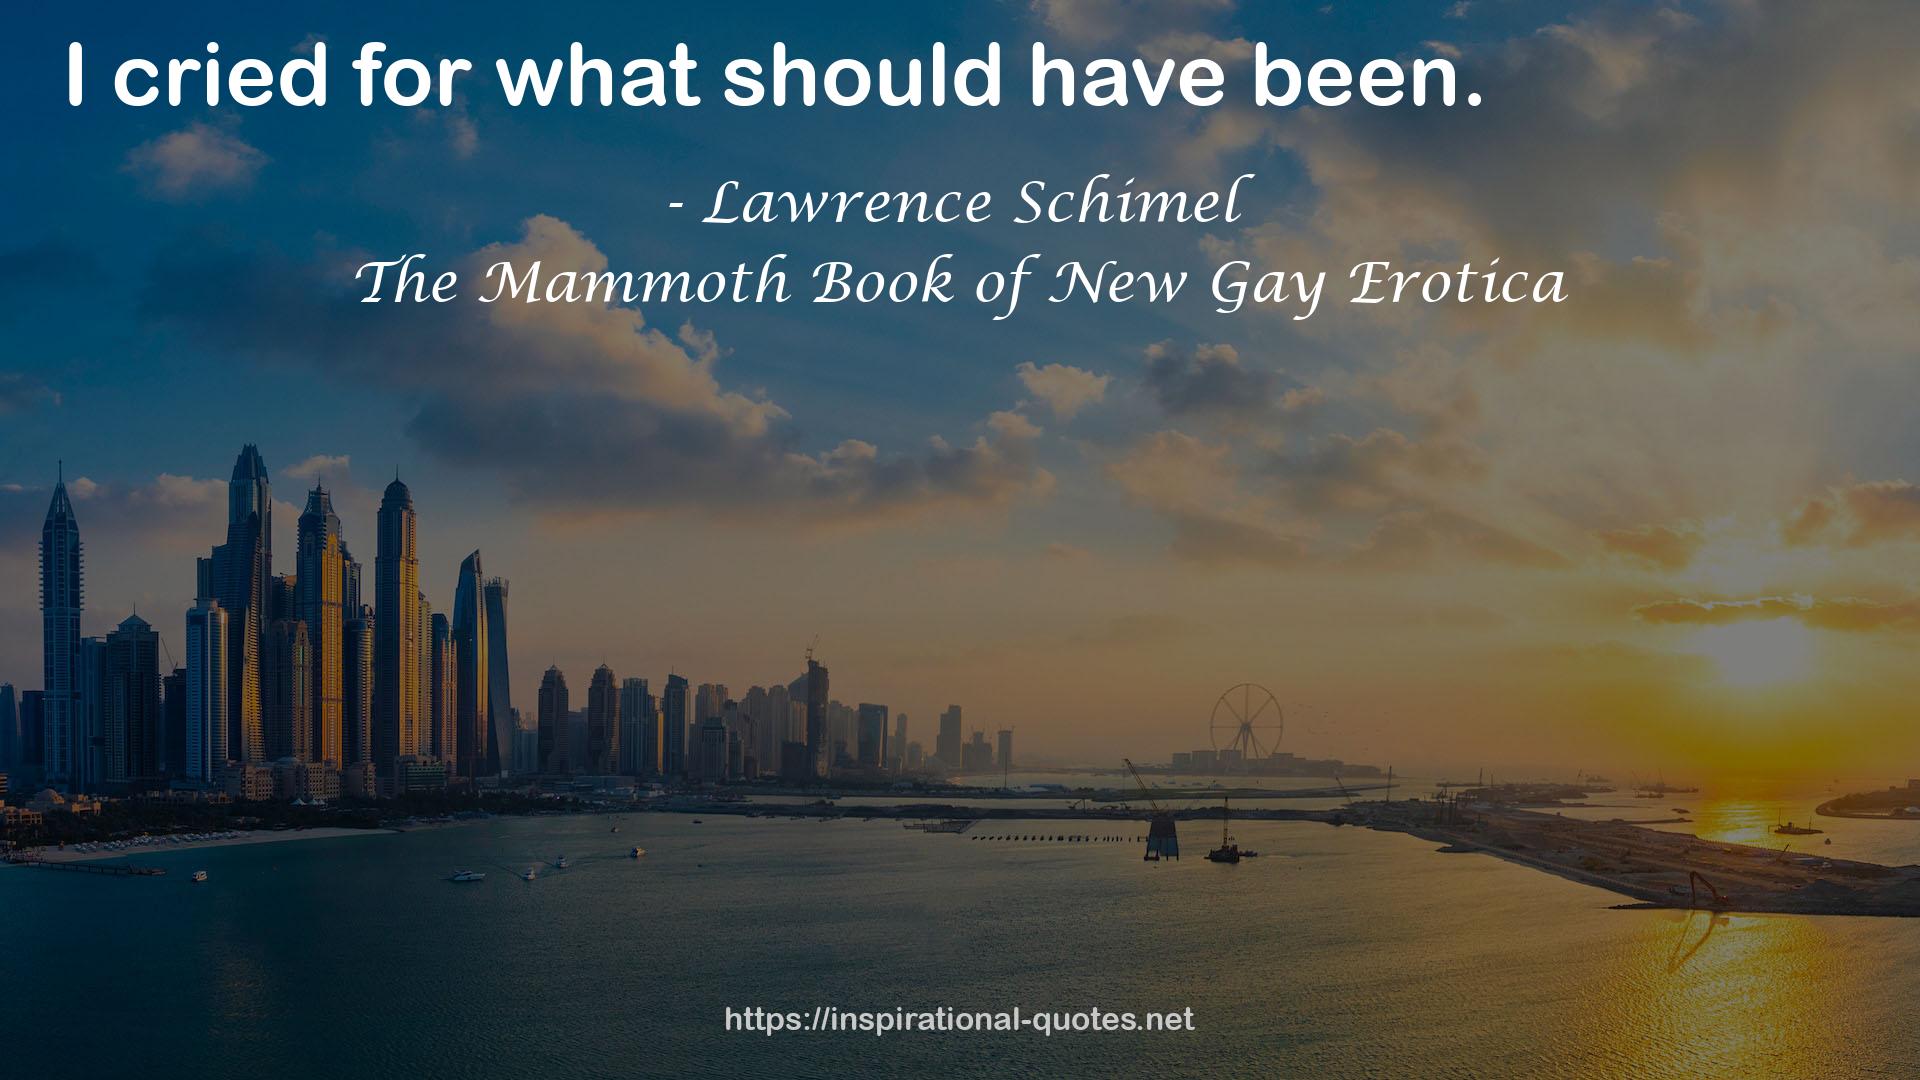 The Mammoth Book of New Gay Erotica QUOTES